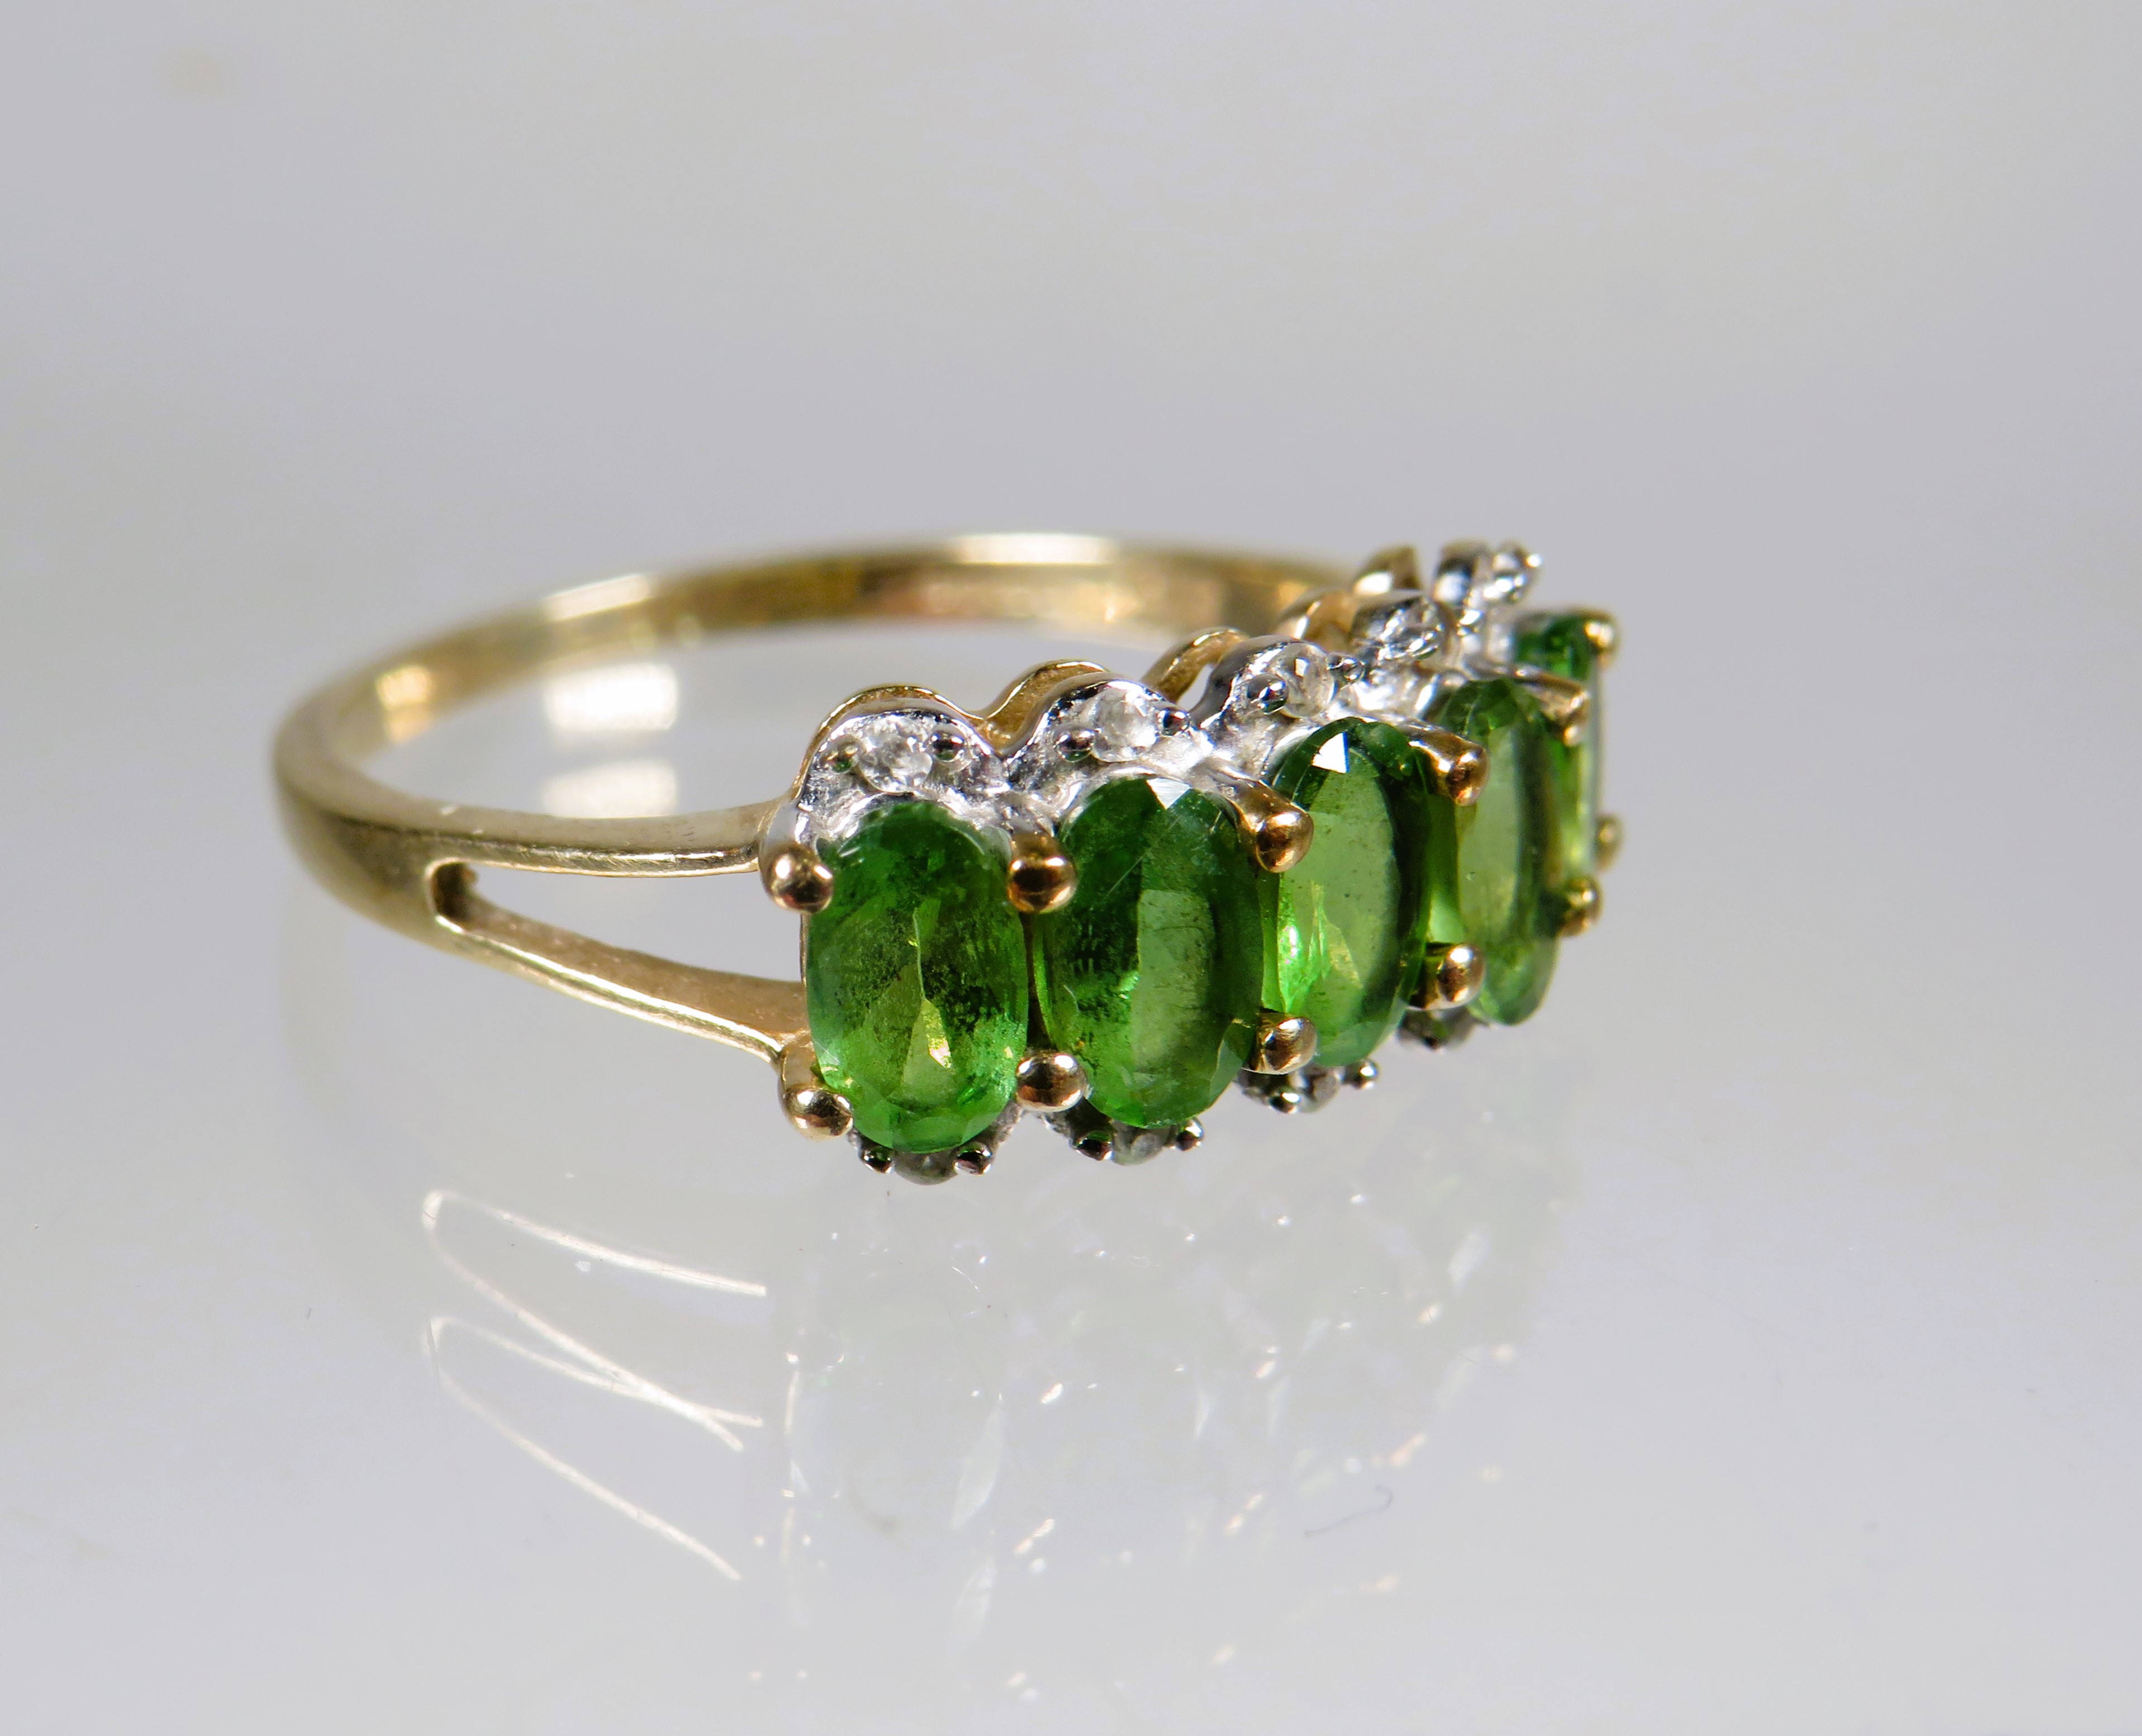 9ct Yellow Gold Ring set with a cluster of Green and Clear CZ gemstones.. Finger size 'M-5'   1.8g - Image 2 of 3